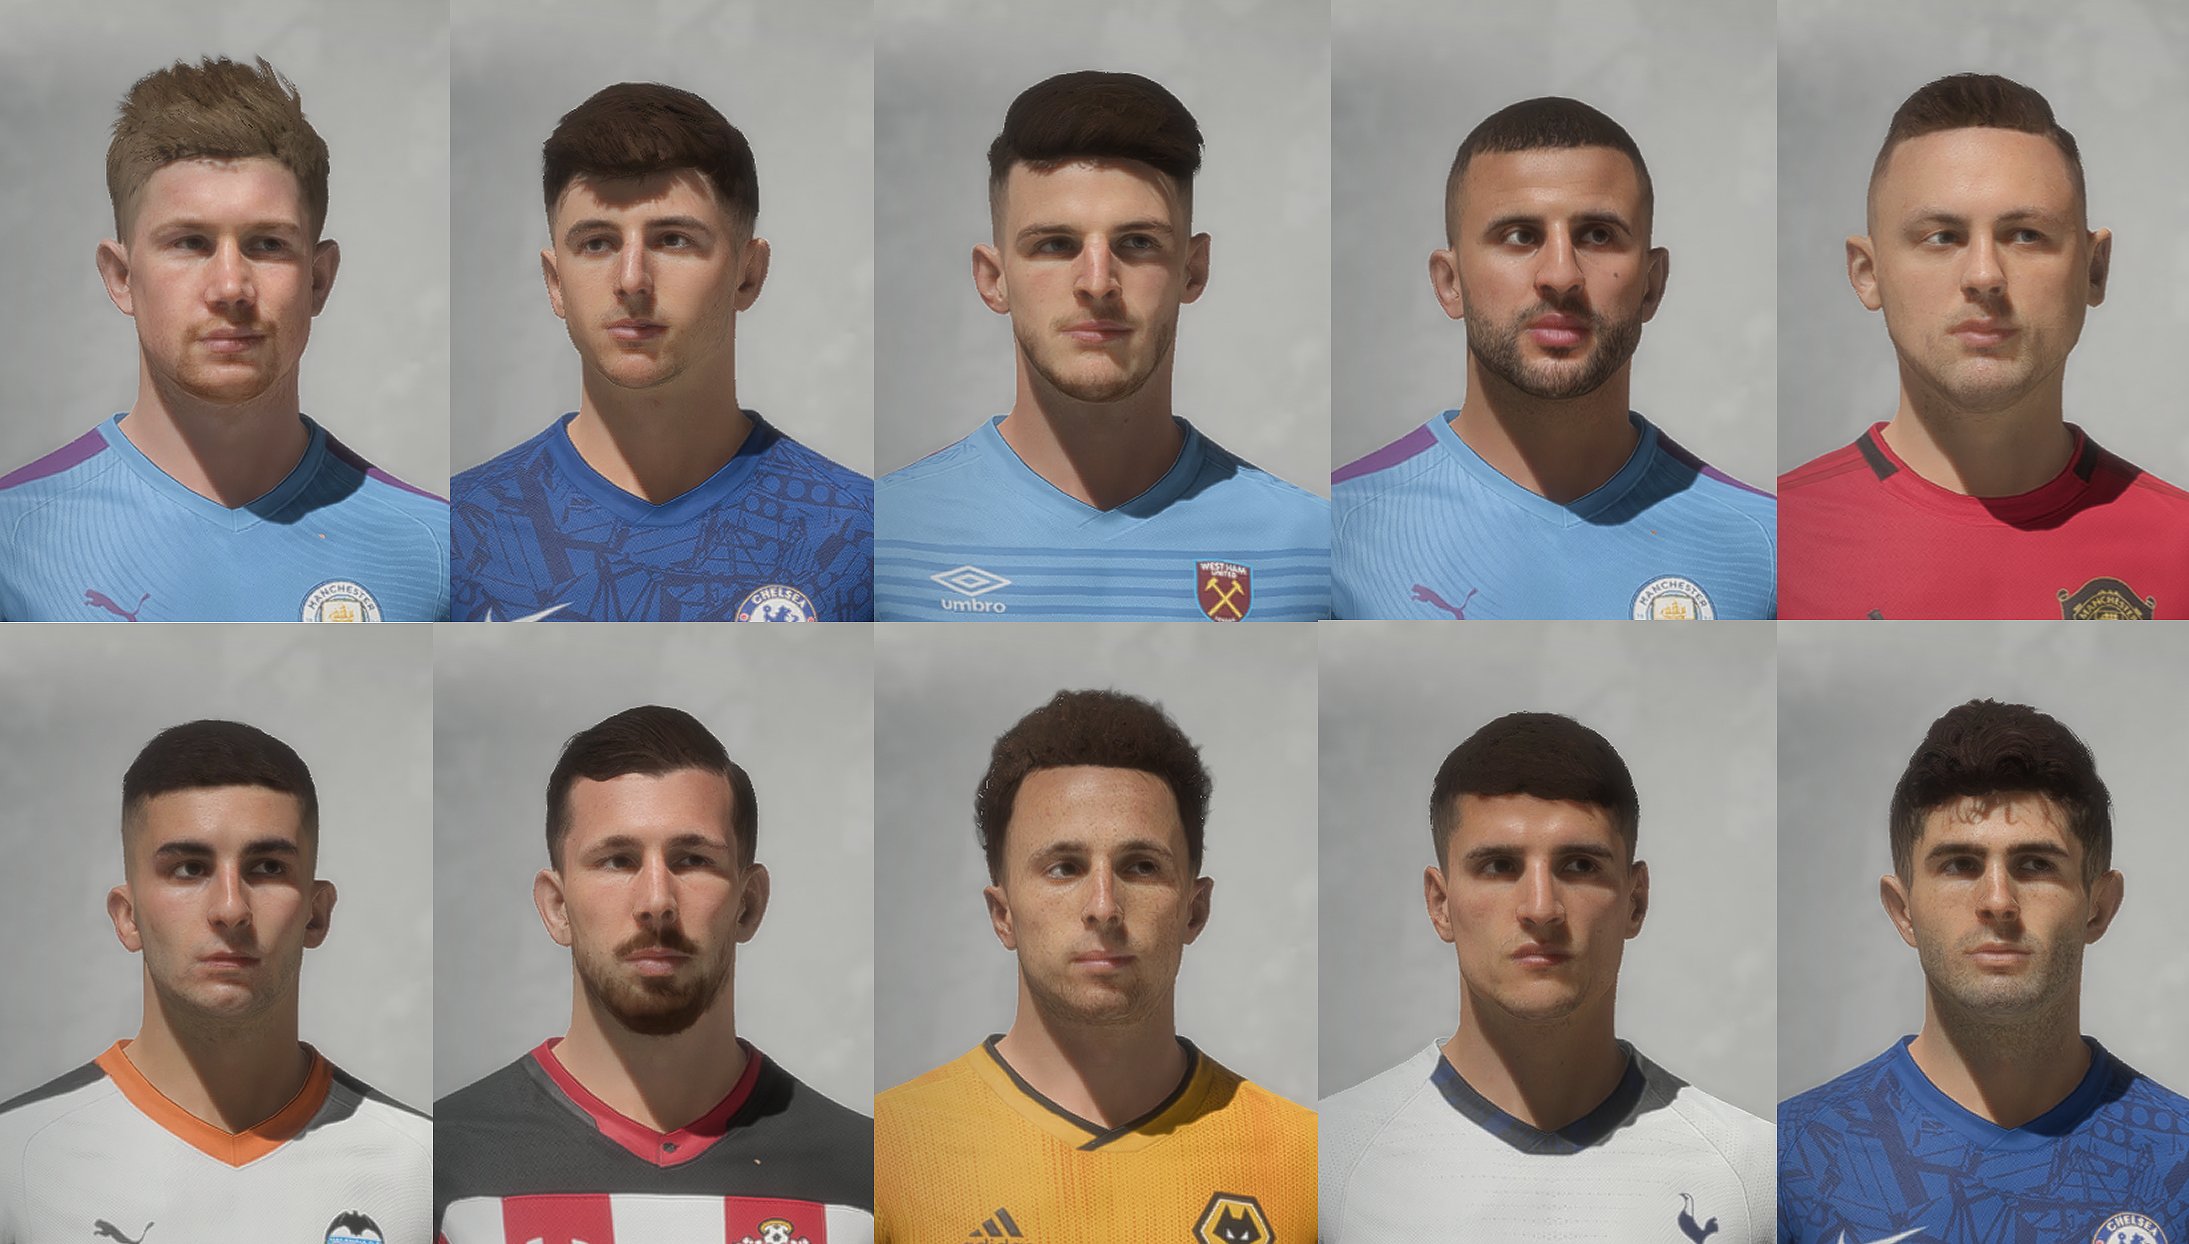 FIFA 22 ALL Real Faces Players / Age 25 - 26 